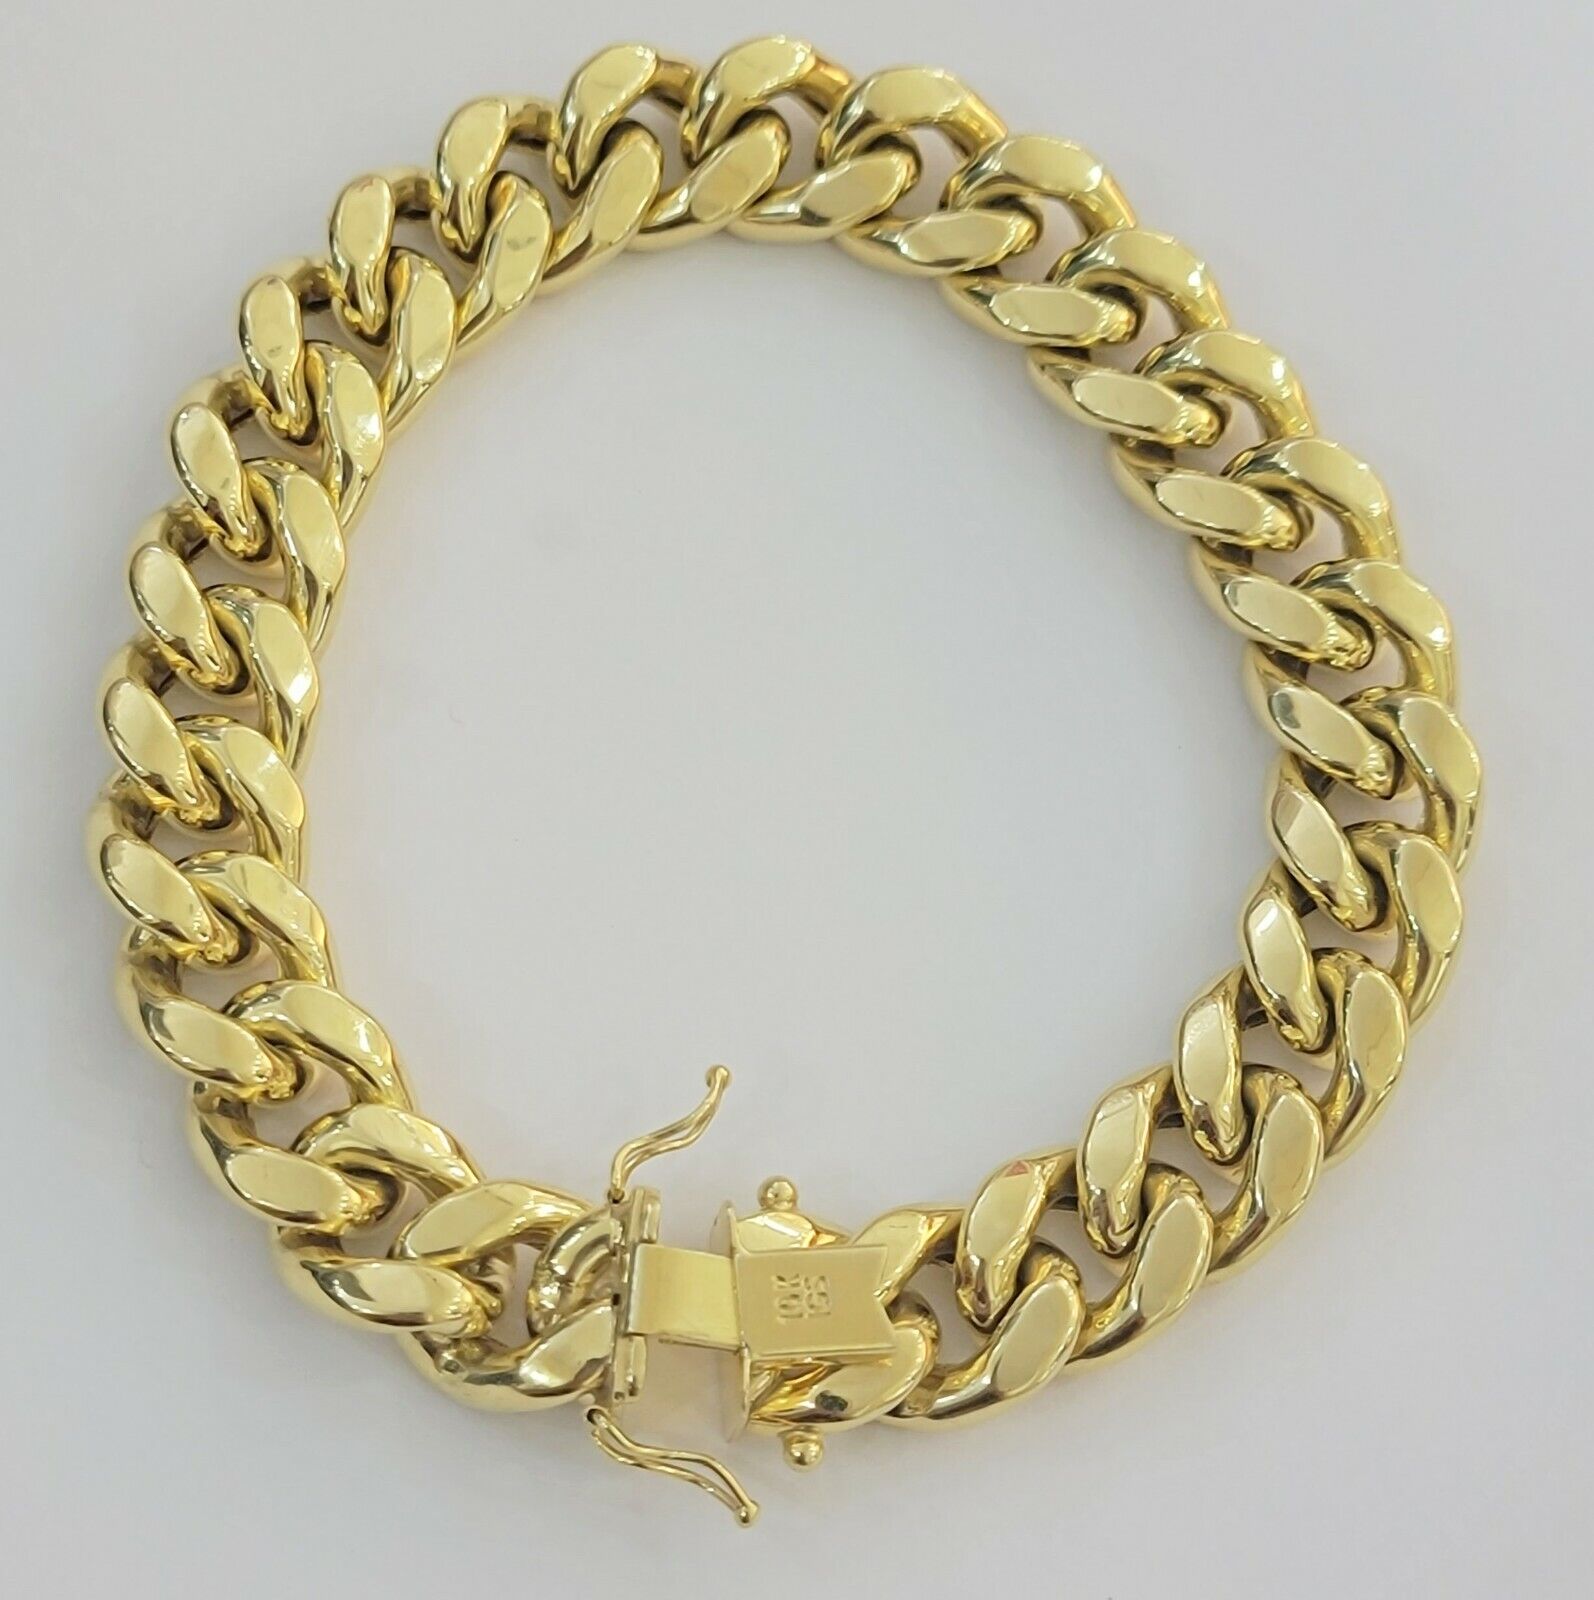 Real 10k Yellow Gold Bracelet 13mm 8 Inch Miami Cuban Link Mens 10KT Strong Link